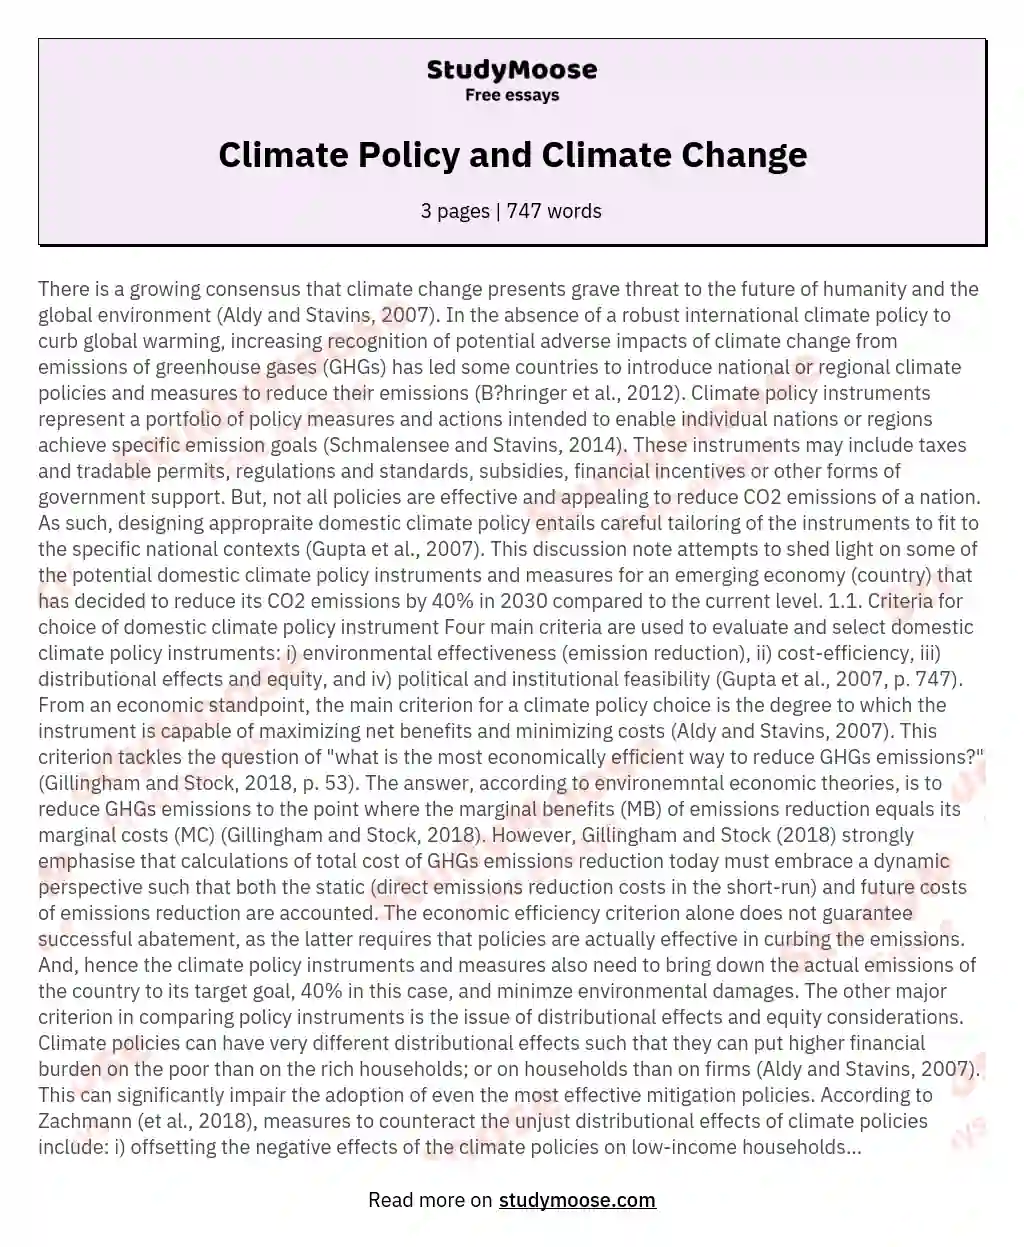 Climate Policy and Climate Change